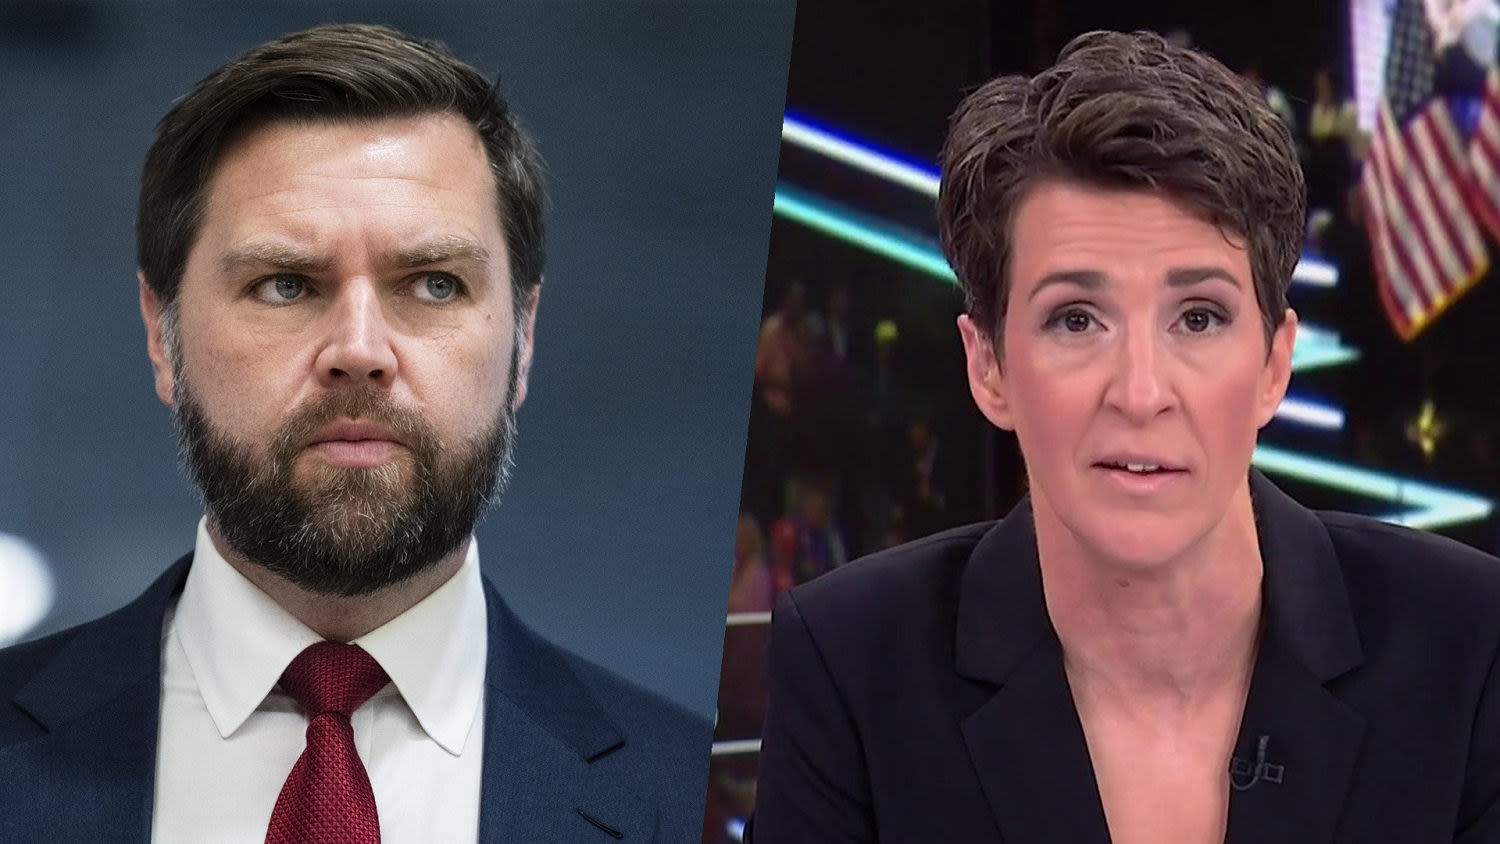 Maddow Blog | 'Noxious': See Maddow expose JD Vance's past statements about Trump, Jan. 6 and more